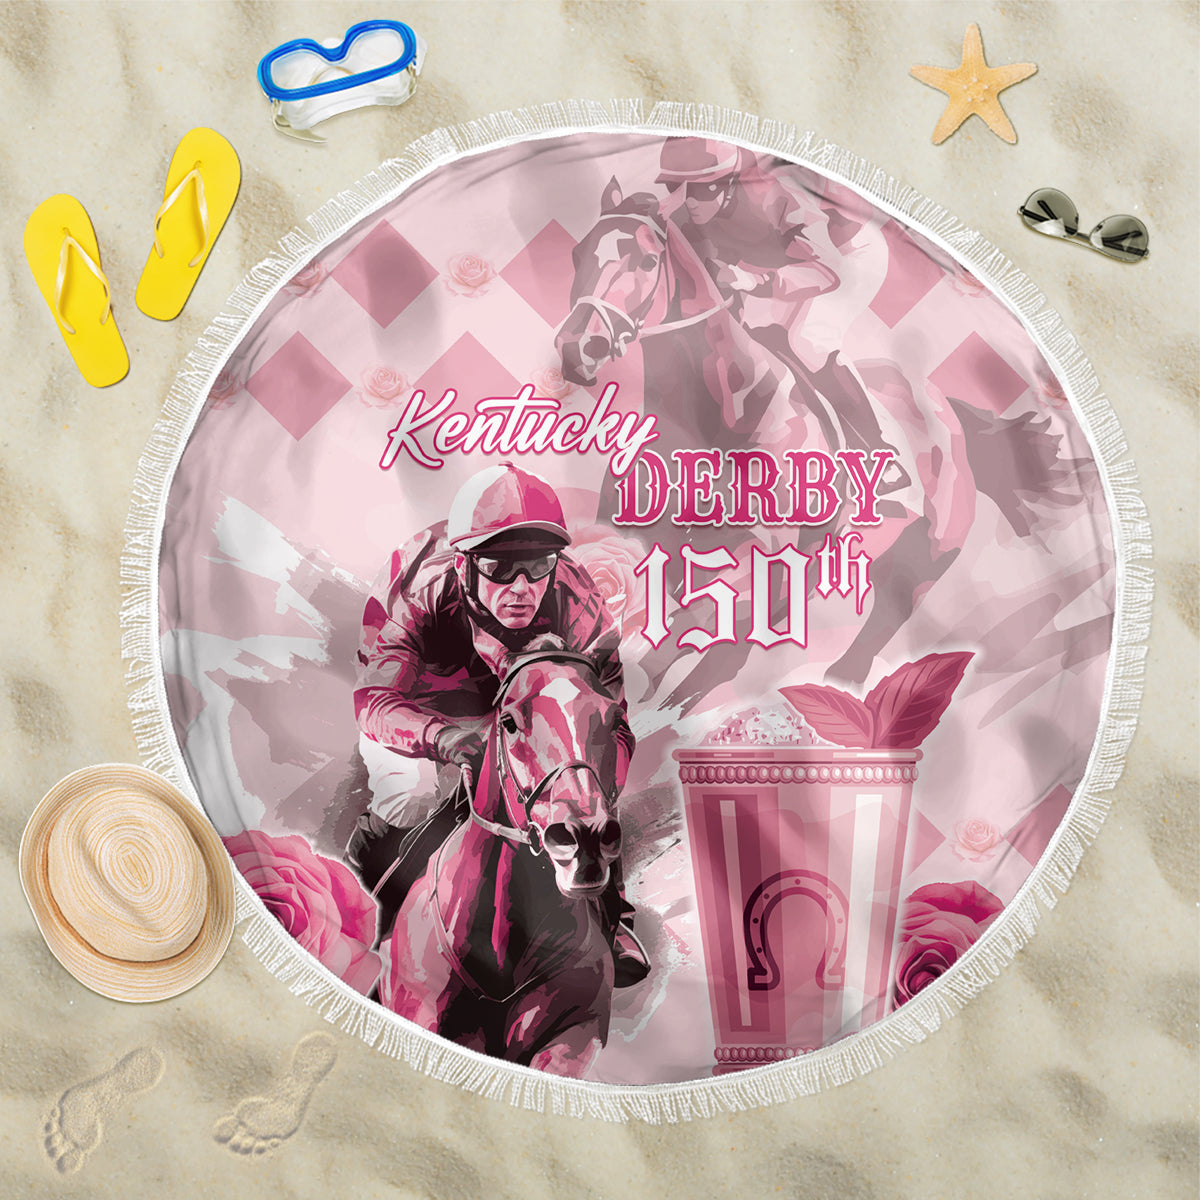 Personalized Kentucky Horse Racing Beach Blanket 150th Anniversary Mint Julep Pink Version